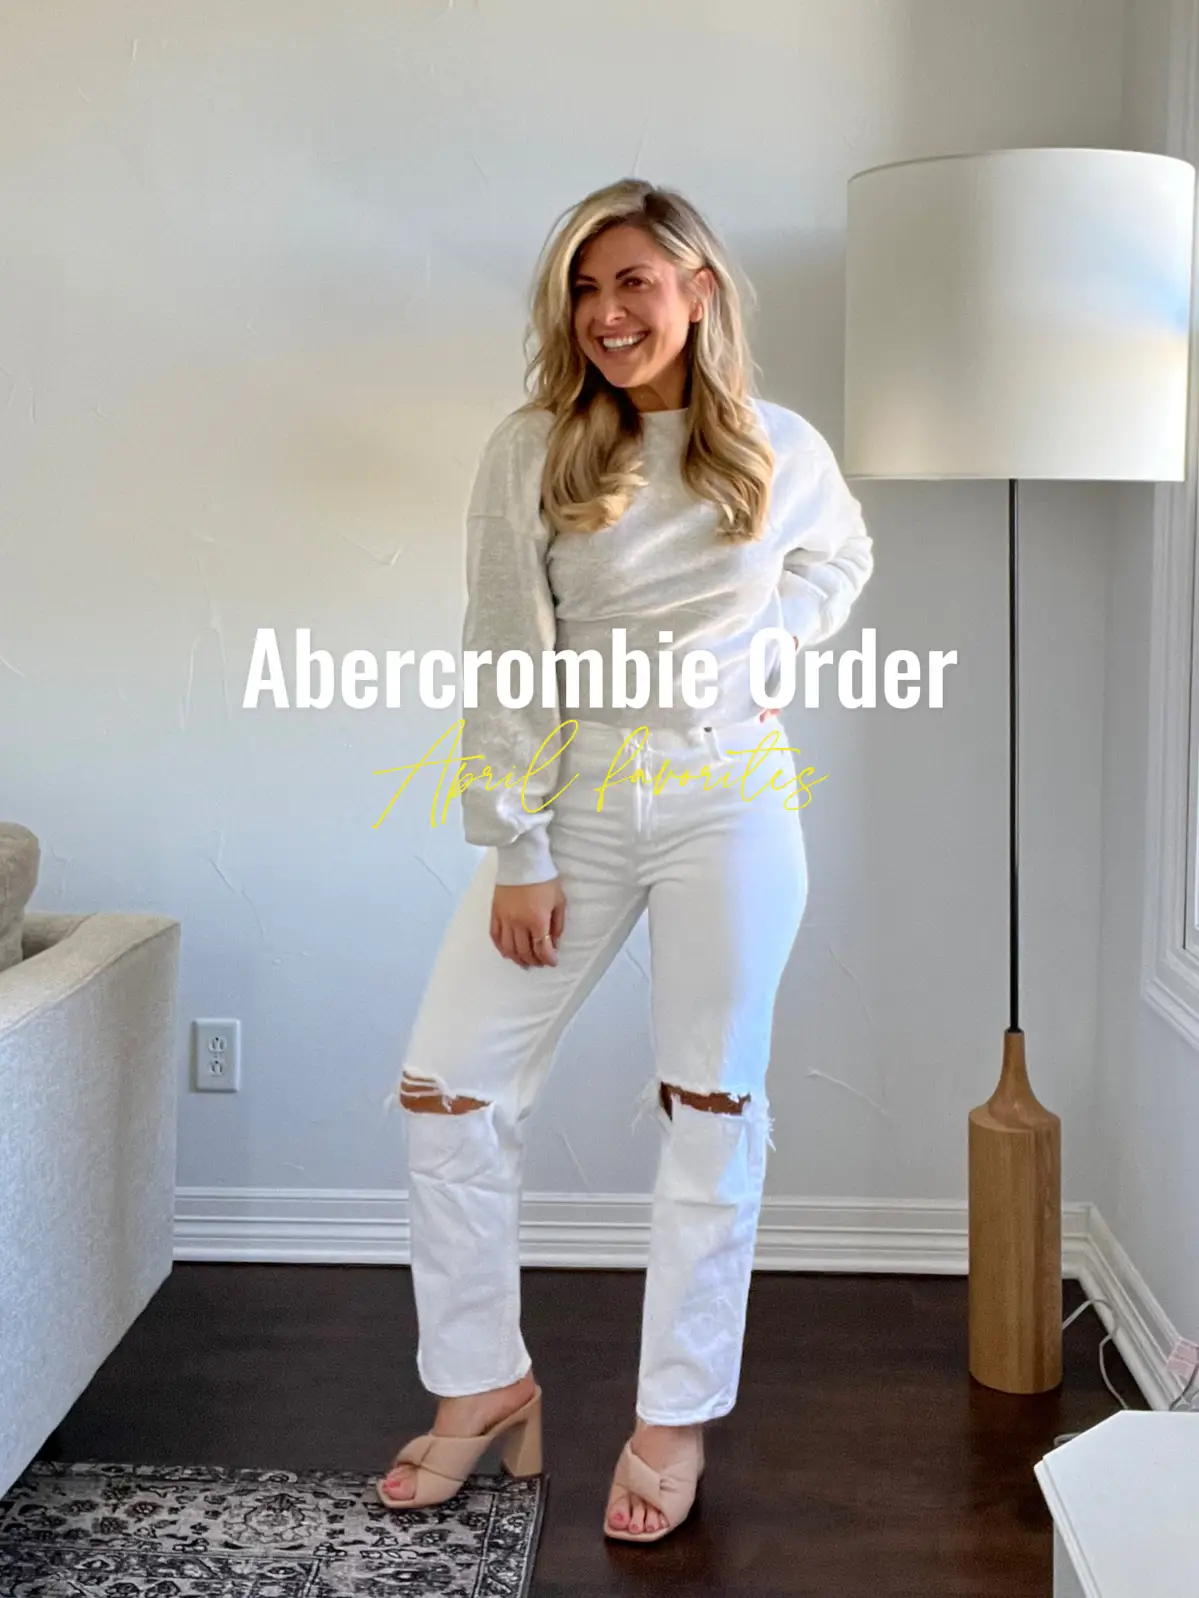 SKIMS MIDSIZE TRY ON HAUL, Gallery posted by MIKAYLA JADE